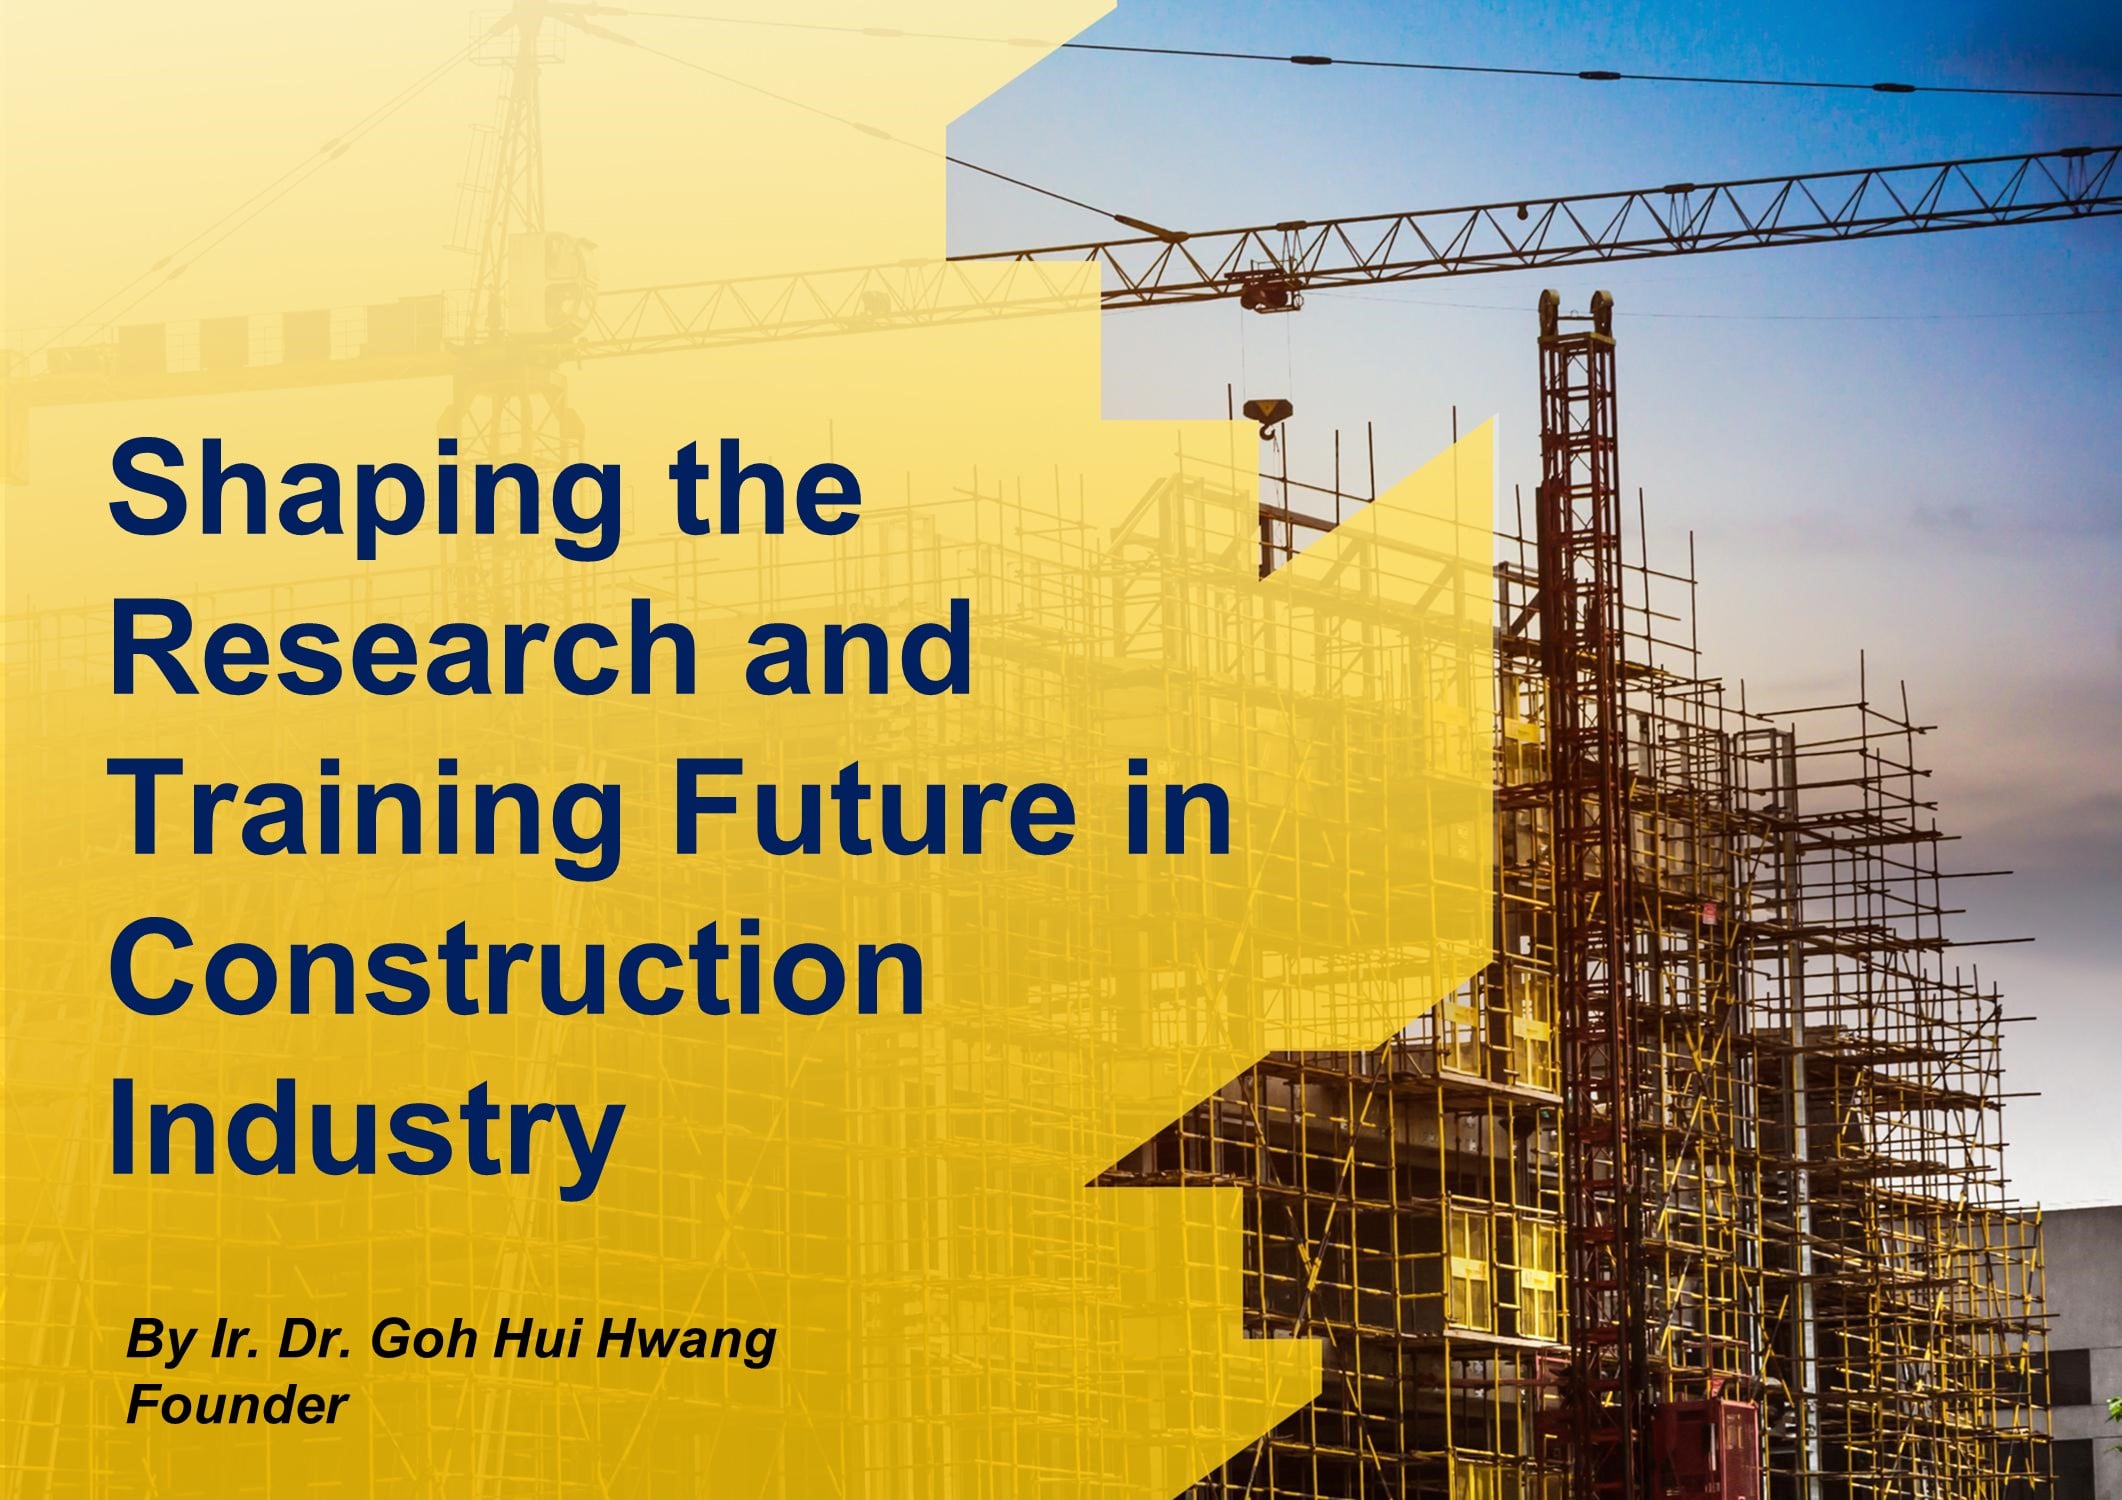 Shaping the Research and Training Future in Construction Industry